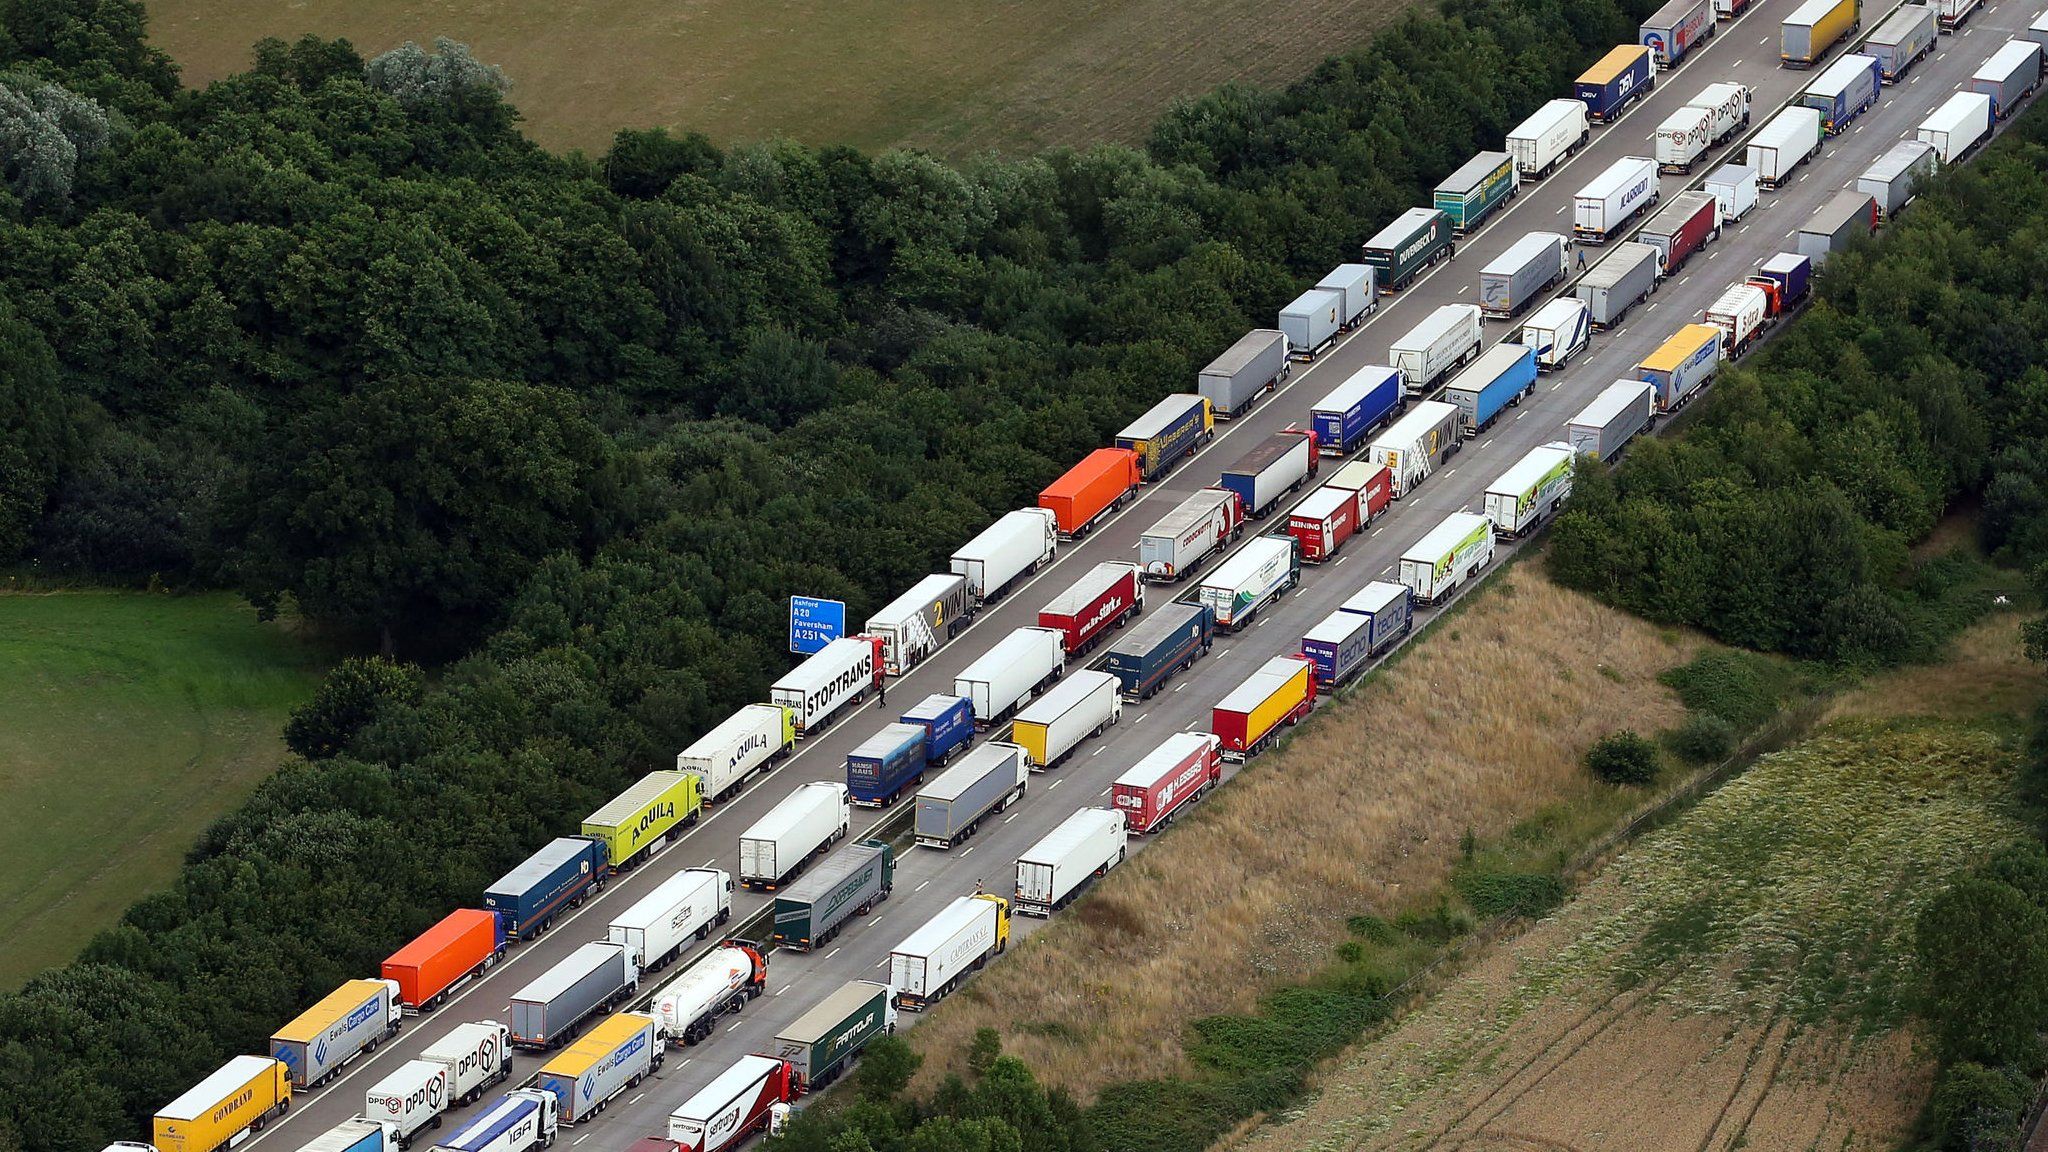 Operation Stack Disneyland Sized Lorry Park To Be Built At Stanford